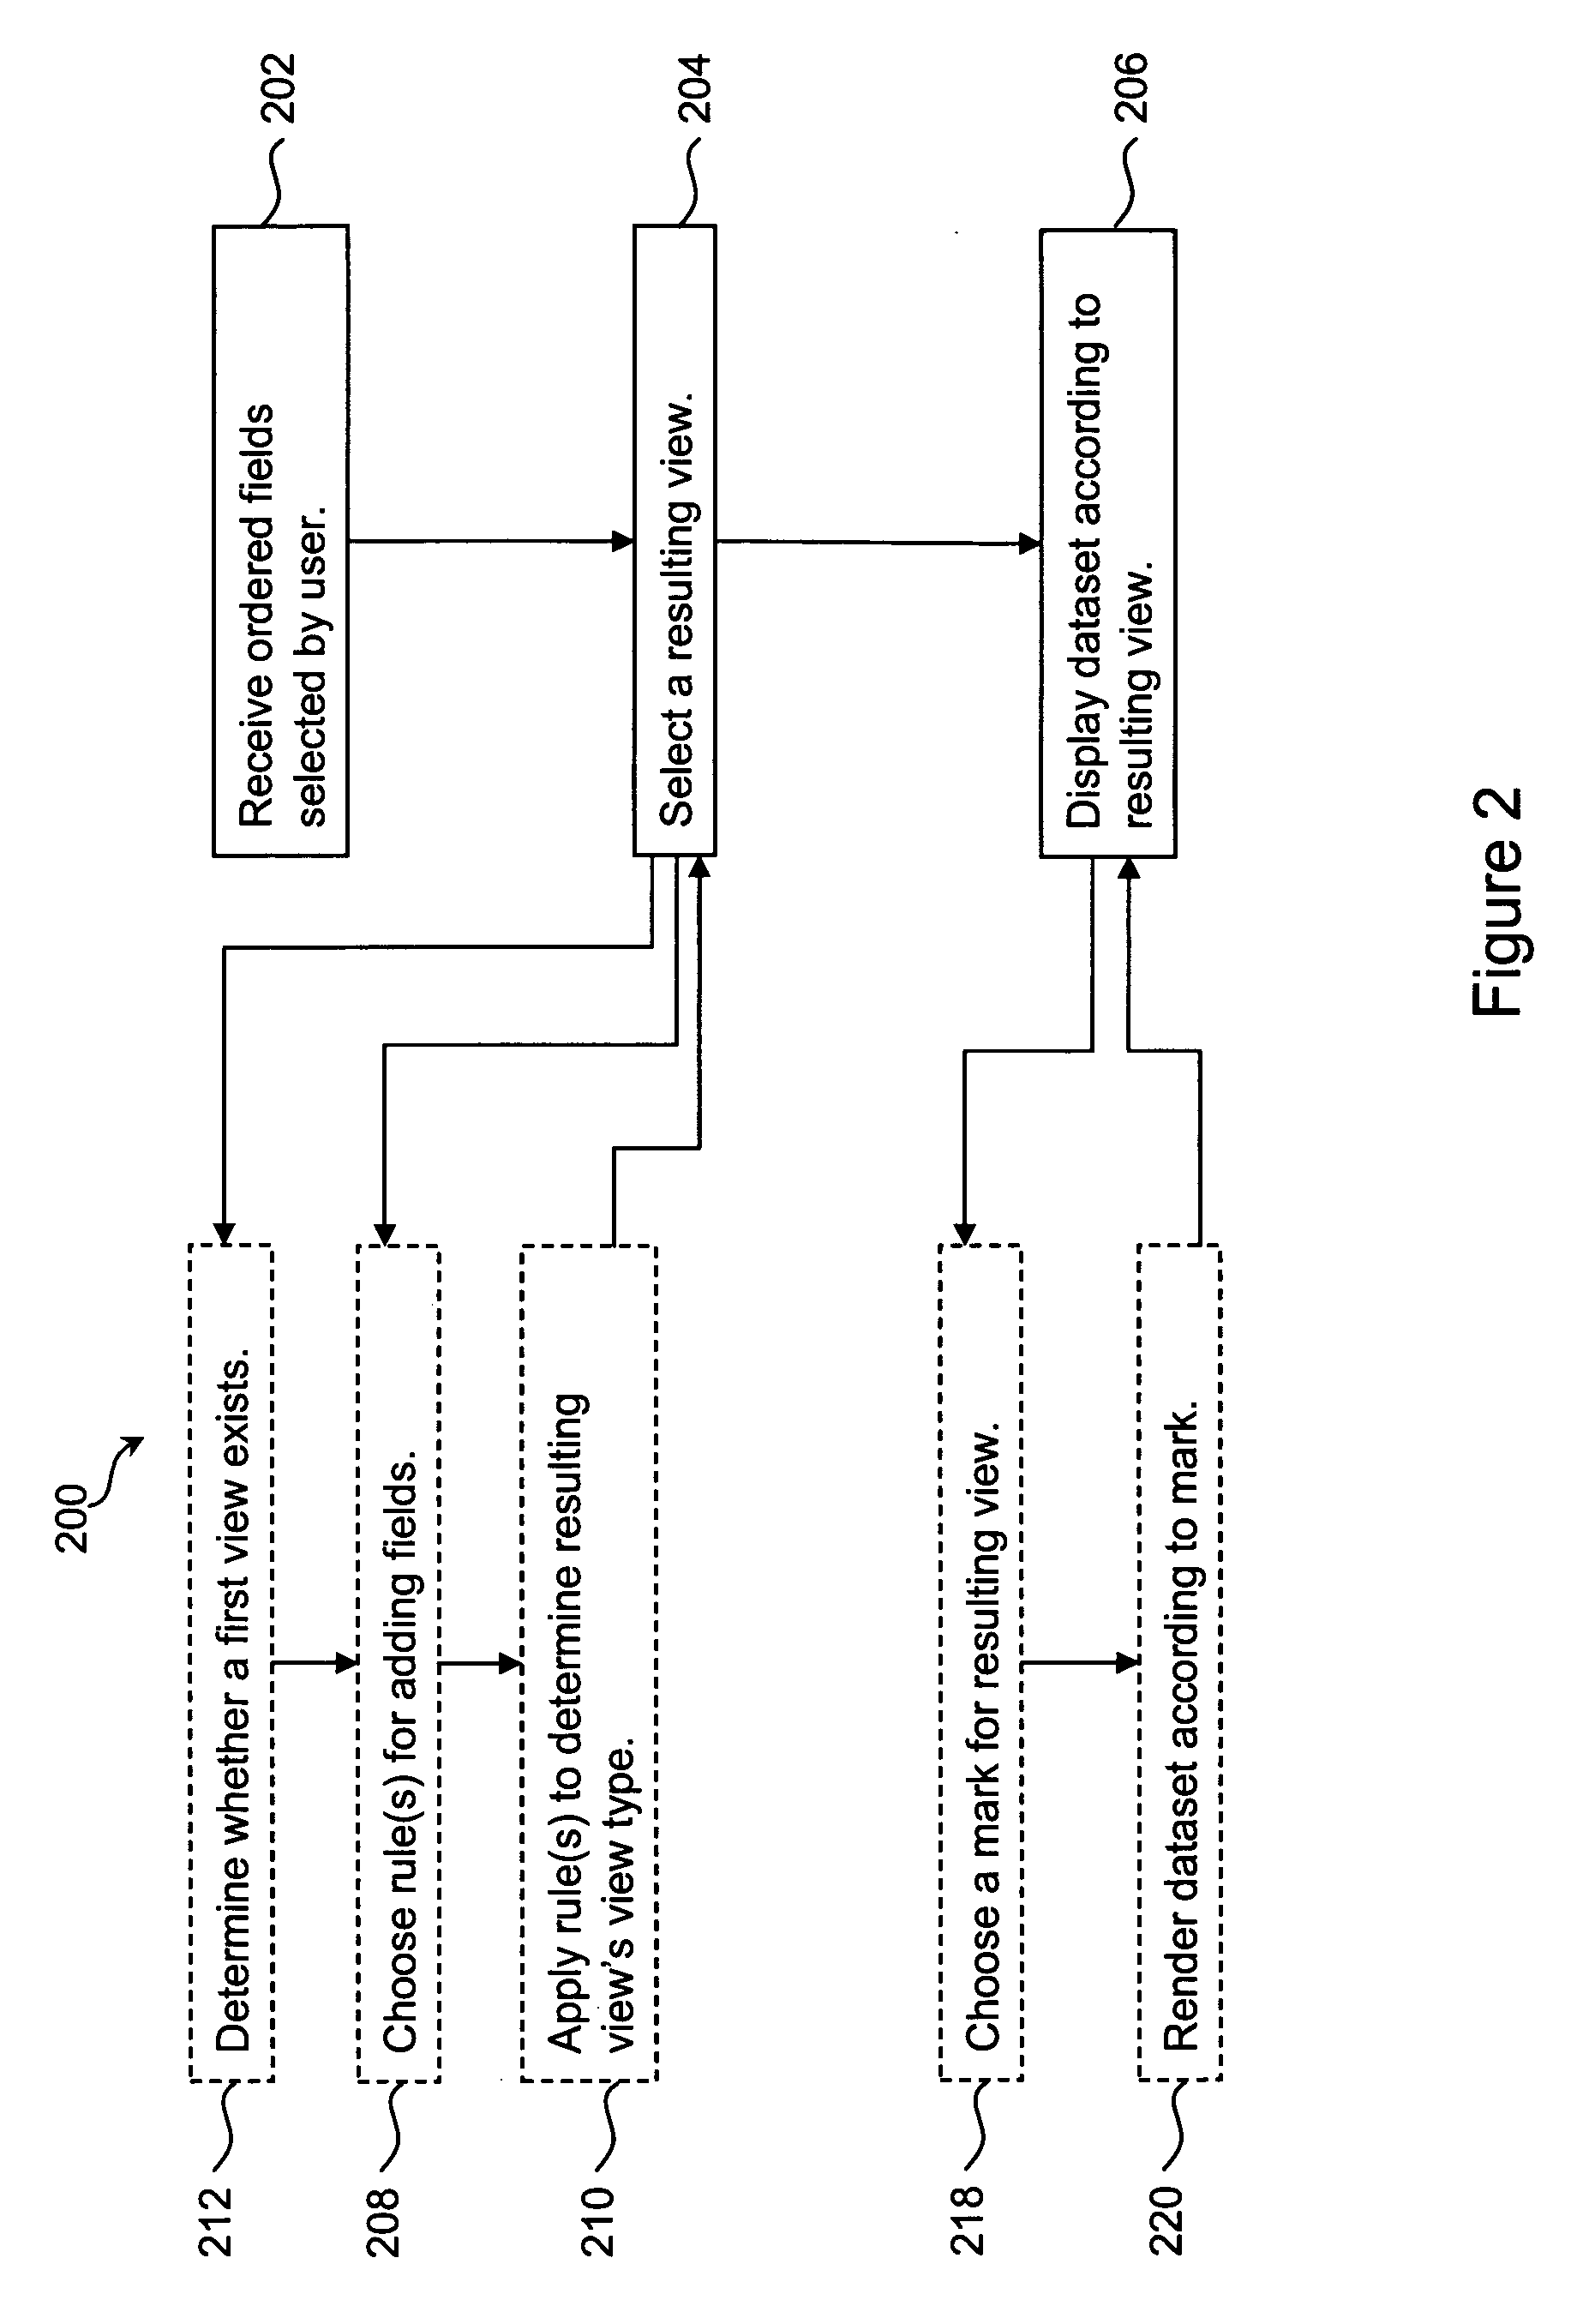 Computer systems and methods for automatically viewing multidimensional databases